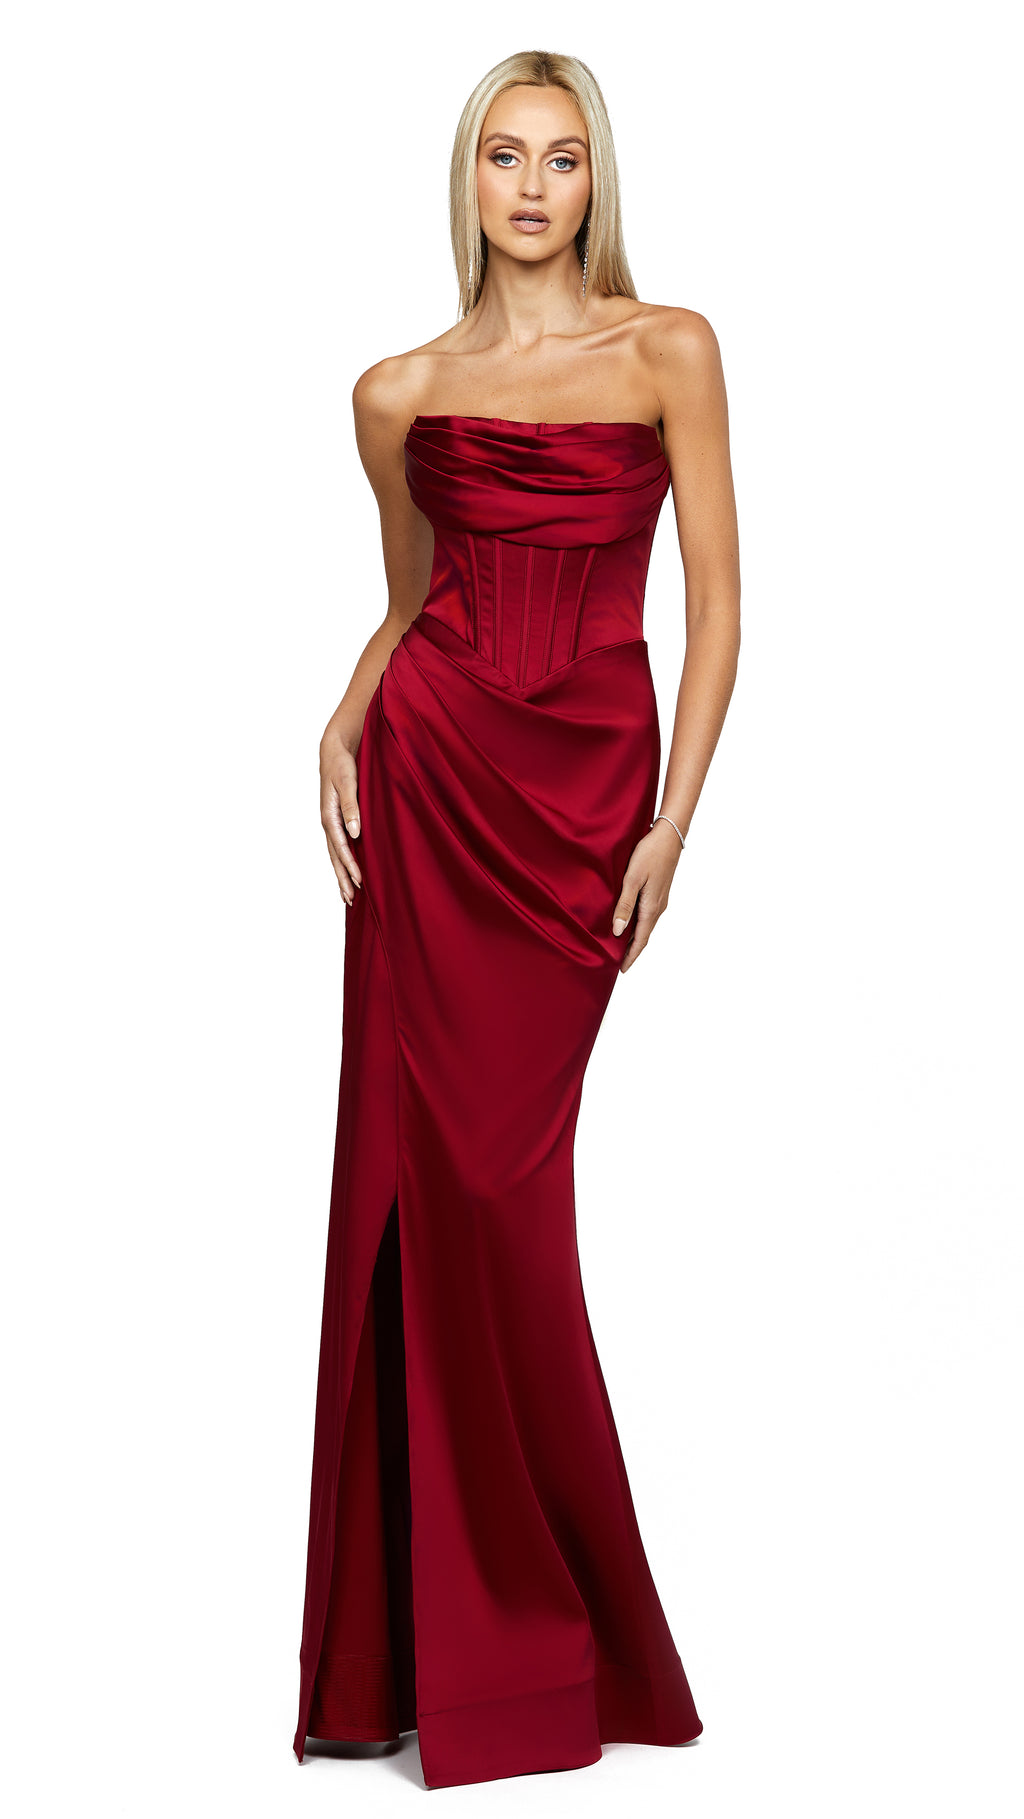 Gess Off Shoulder Fishtail Gown in Burgundy Red